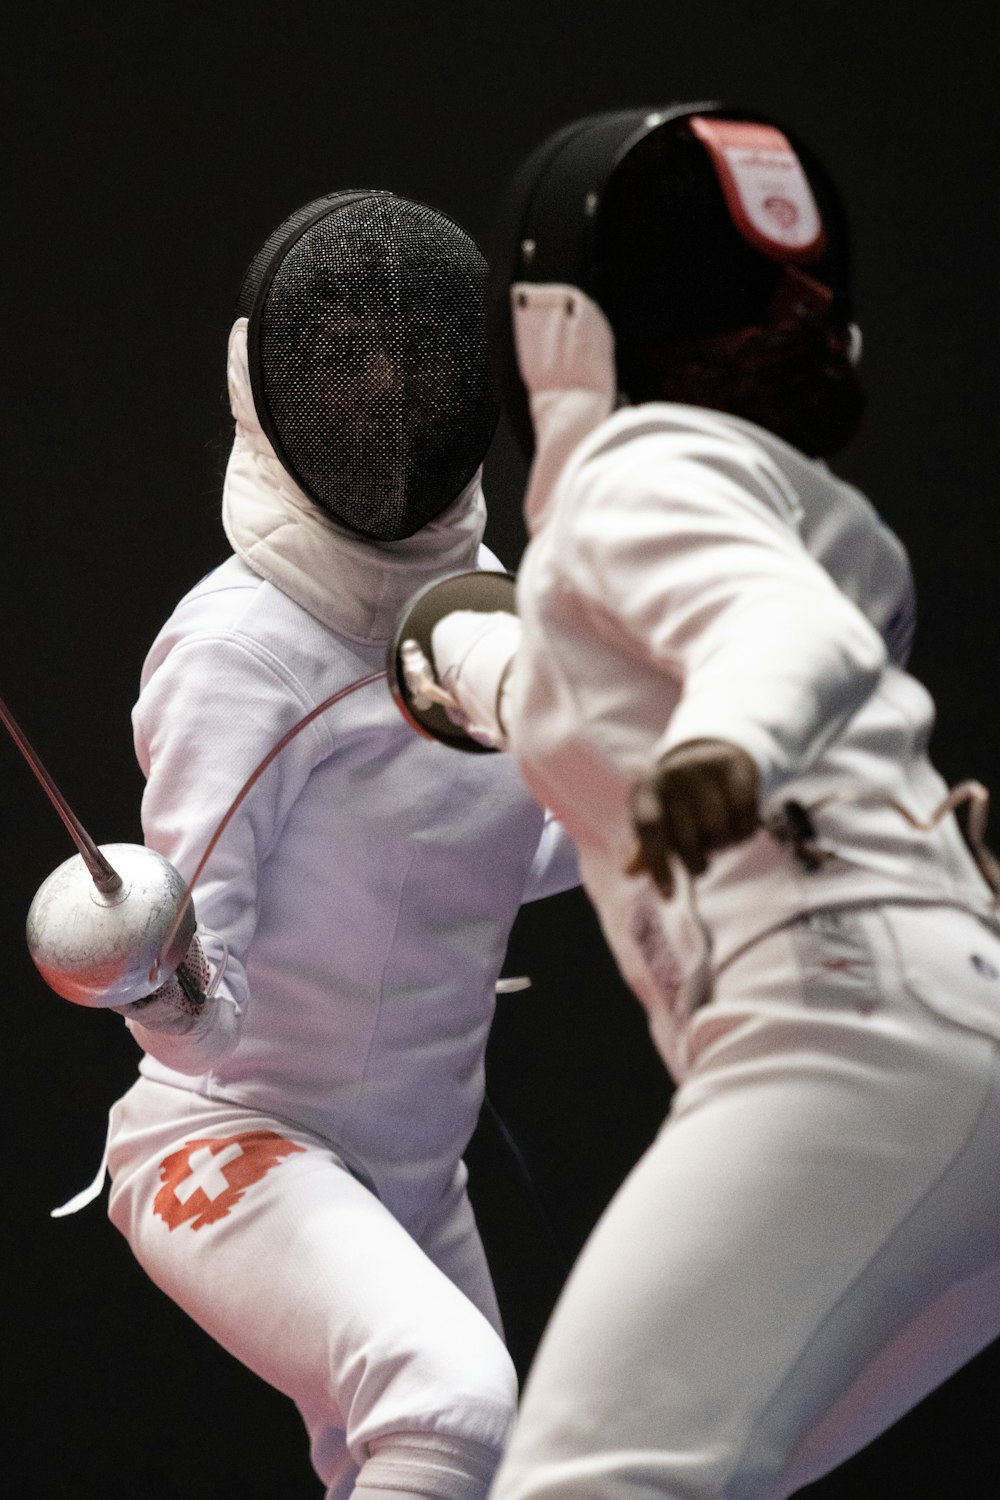 two men in fencing gear are fighting over a ball